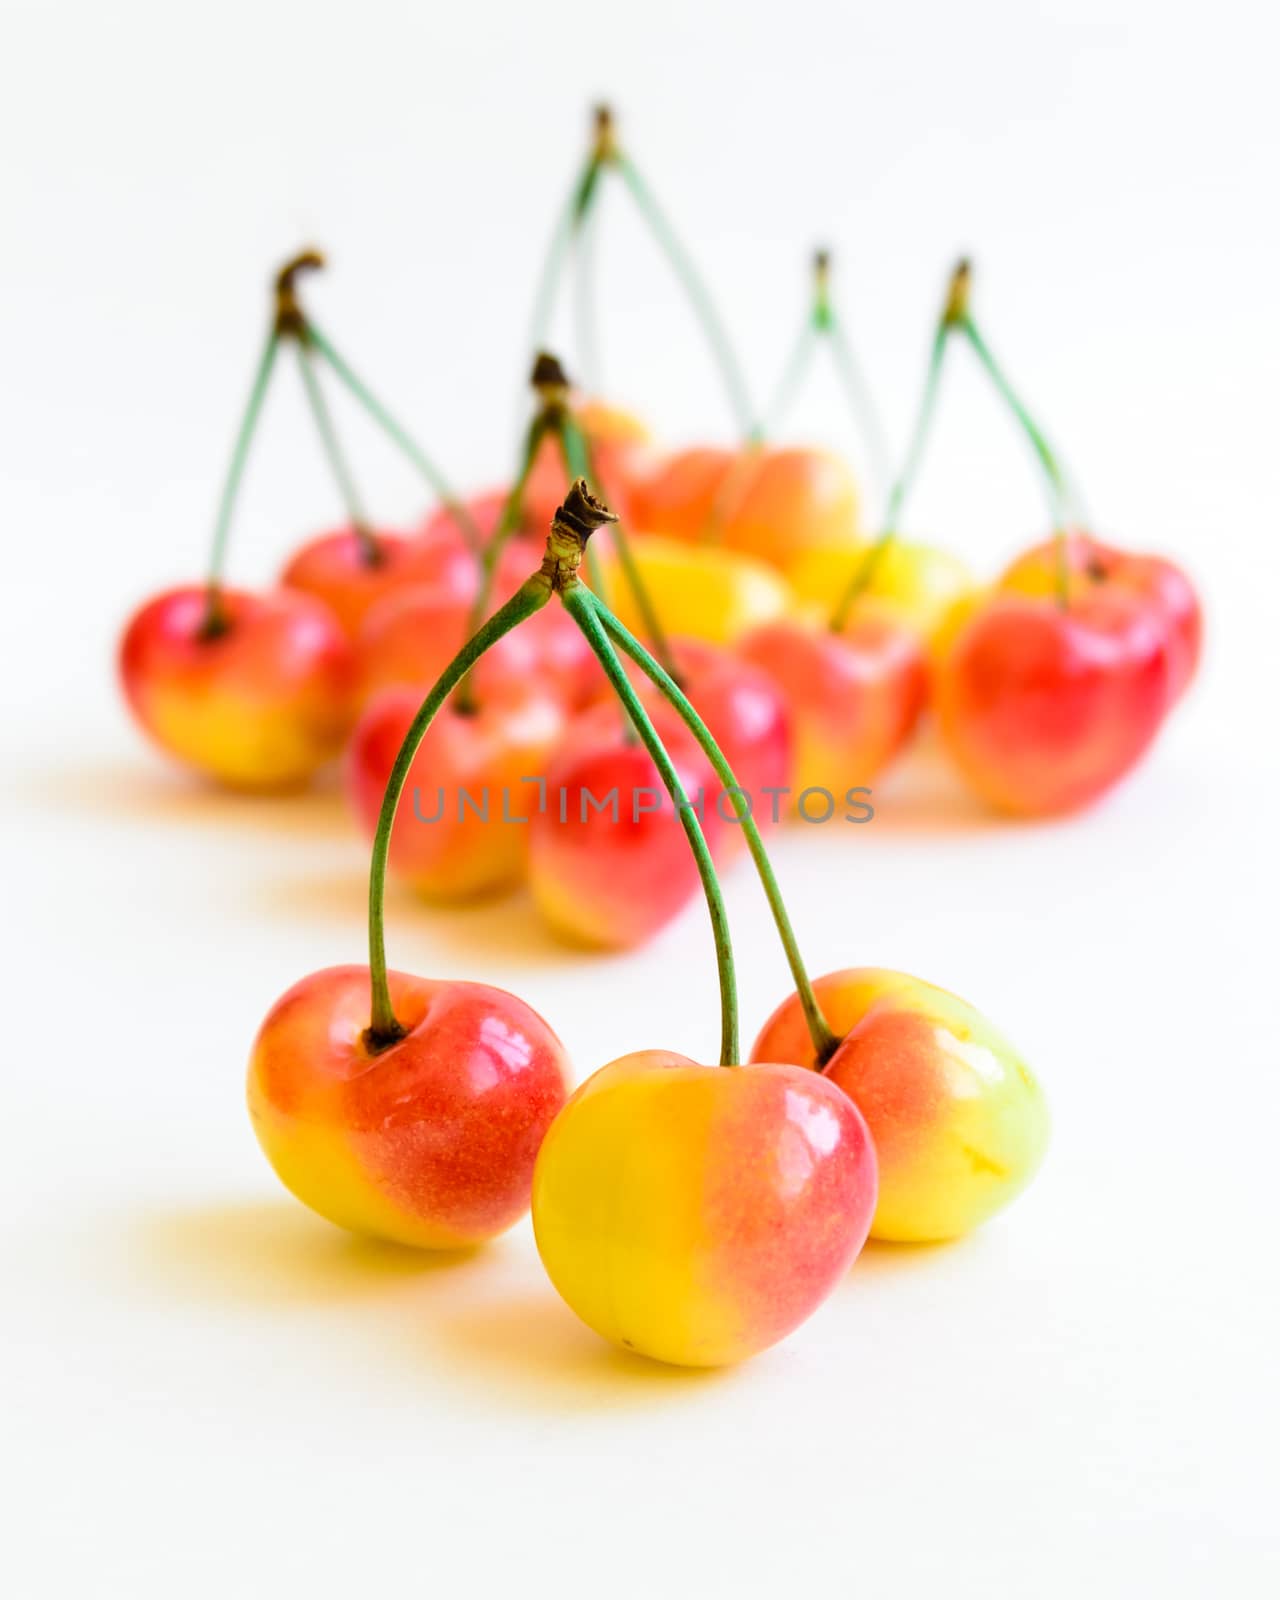 Selective focus two Rainer cherries joined with stem and blurred cherry pile isolated on white background. Fresh picked organic cherries grown in Yakima Valley, Washington State, USA